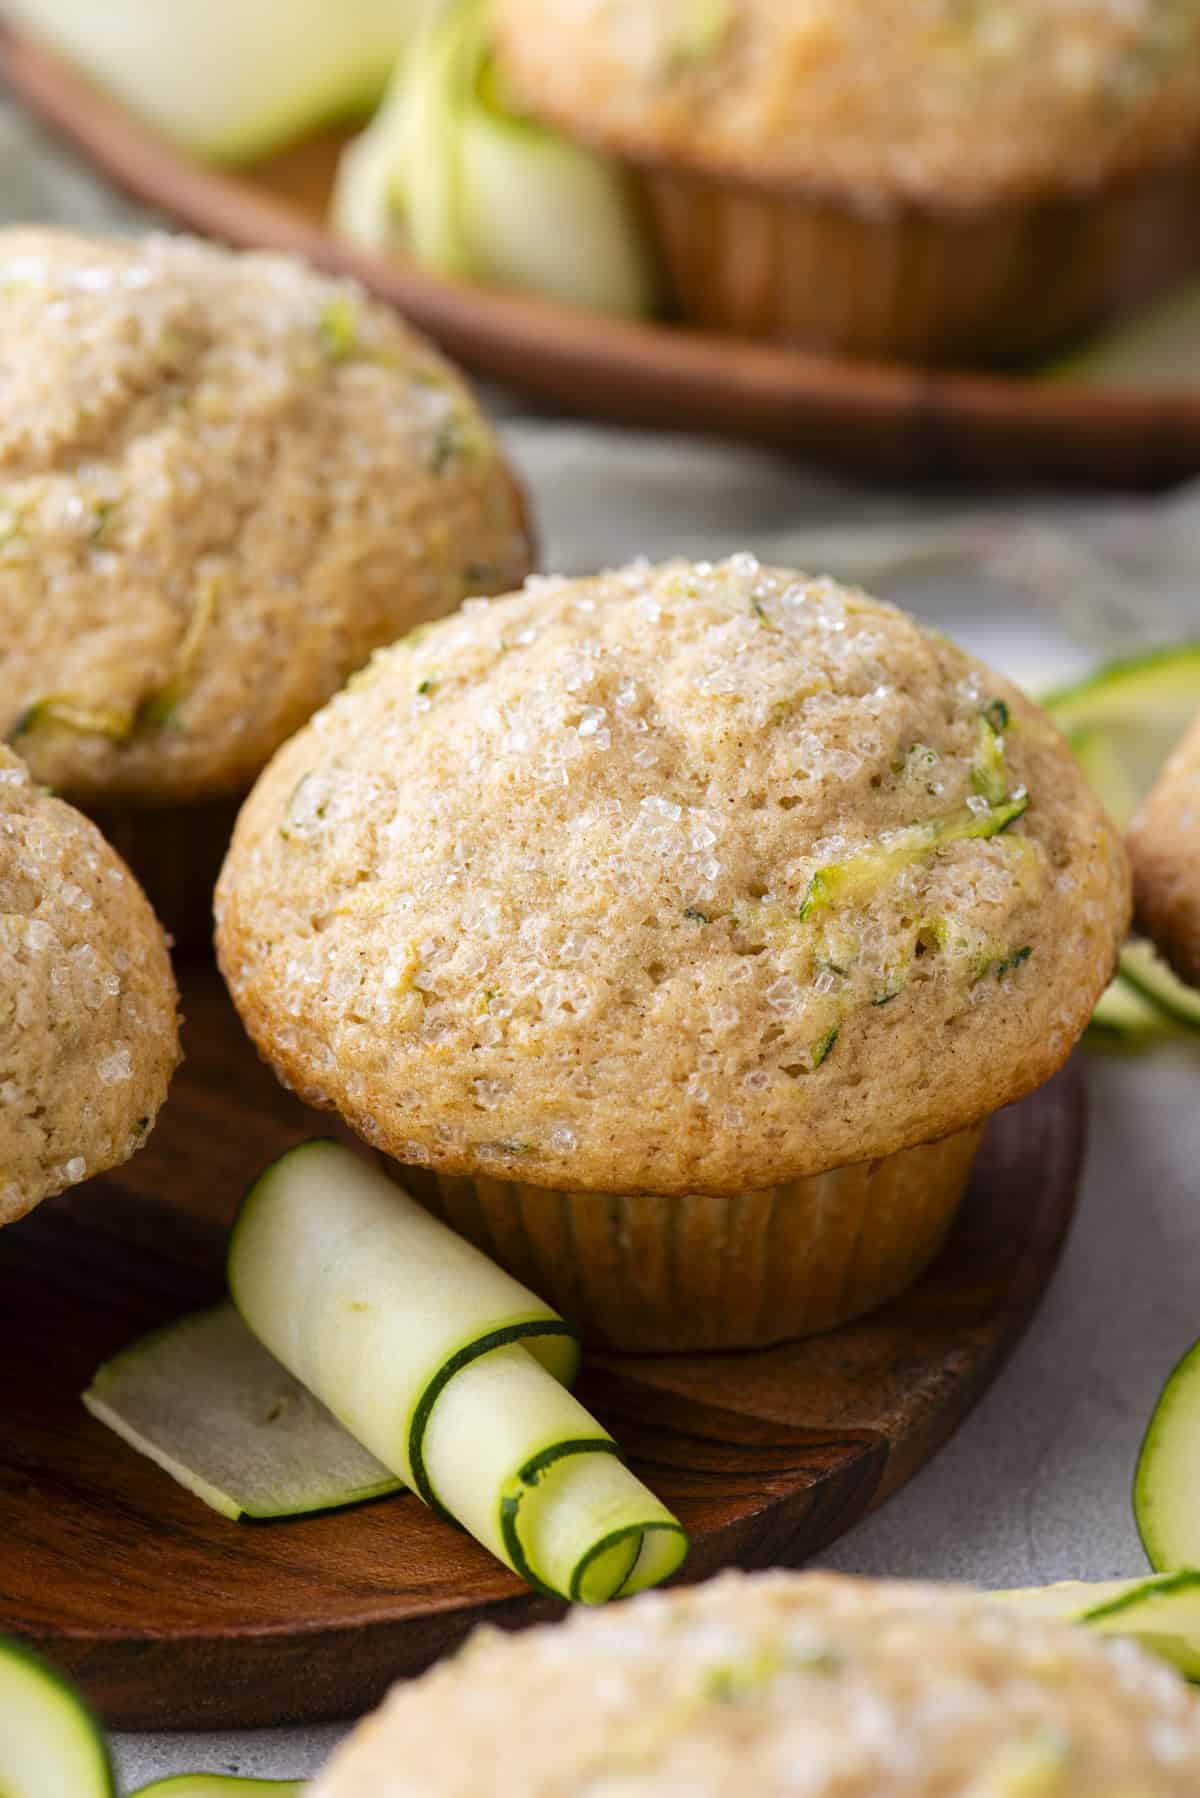 zucchini muffins on a wood plate with more muffins and thin slices of zucchini scattered around